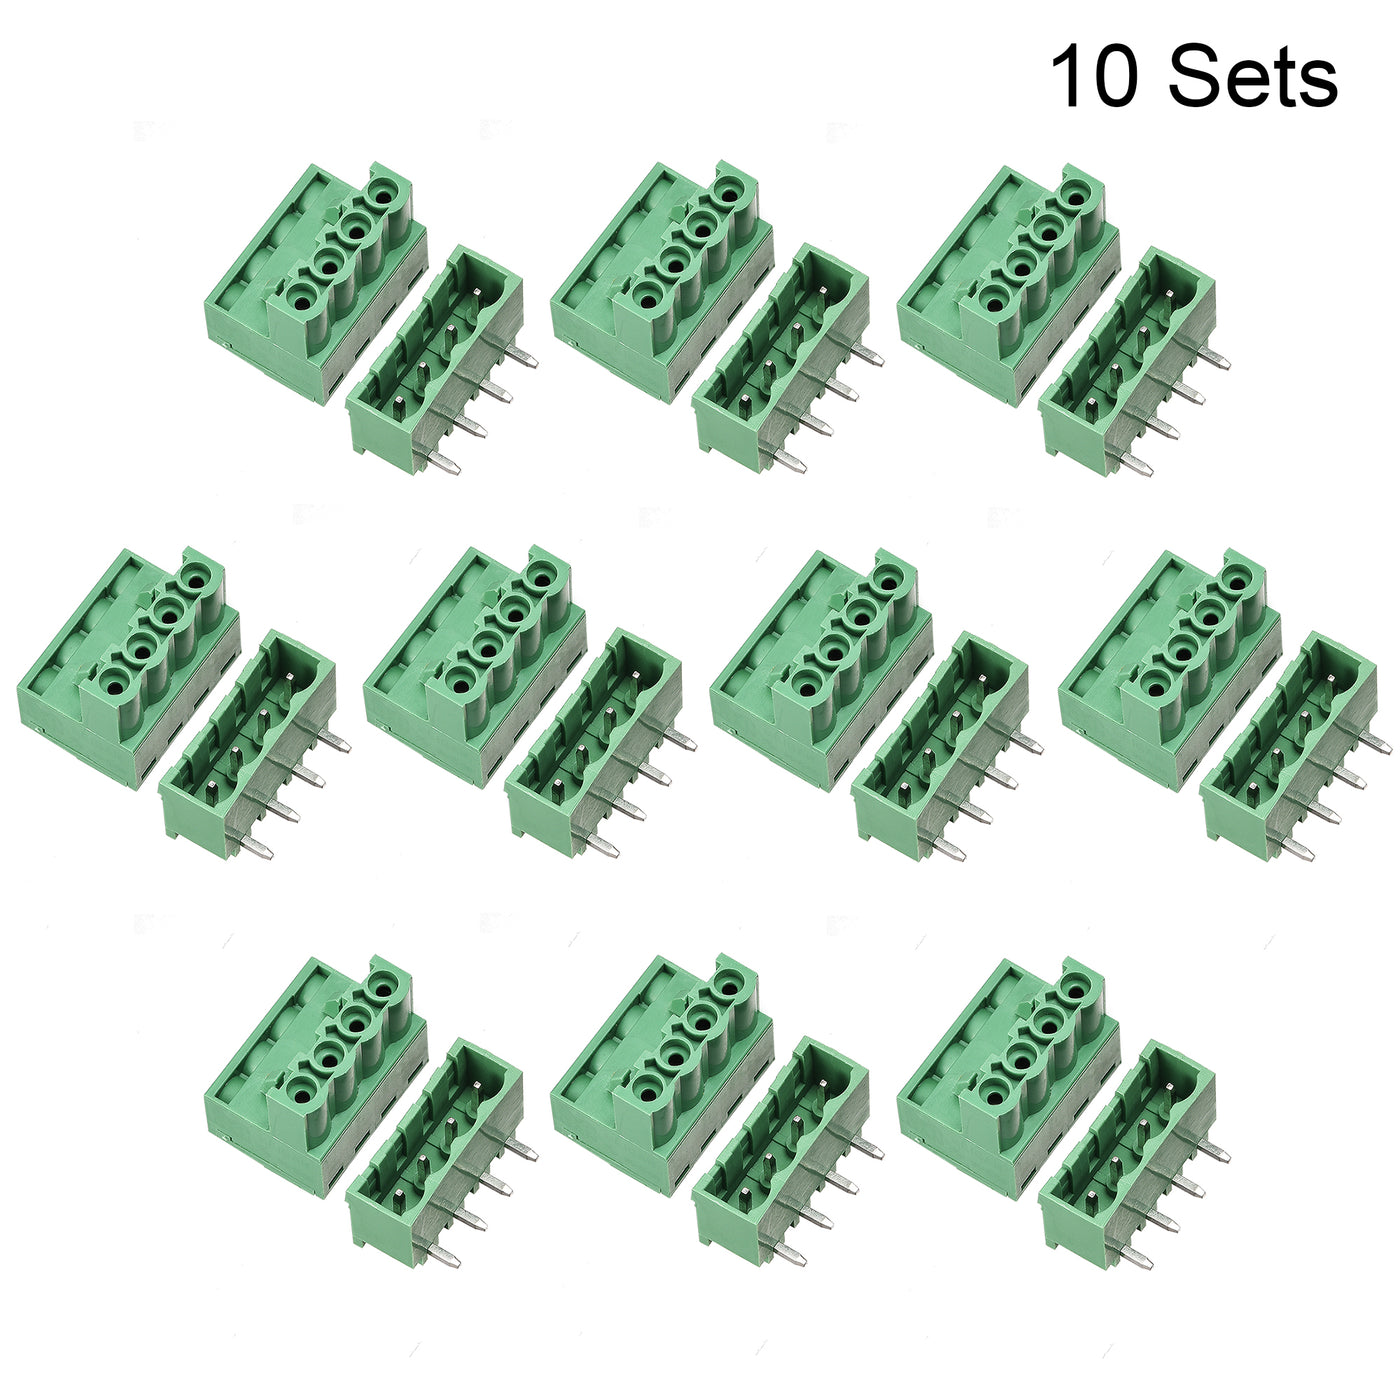 uxcell Uxcell 4-Pin 5.08mm Pitch Right Angle PCB Screw Terminal Block Connector 10 Sets